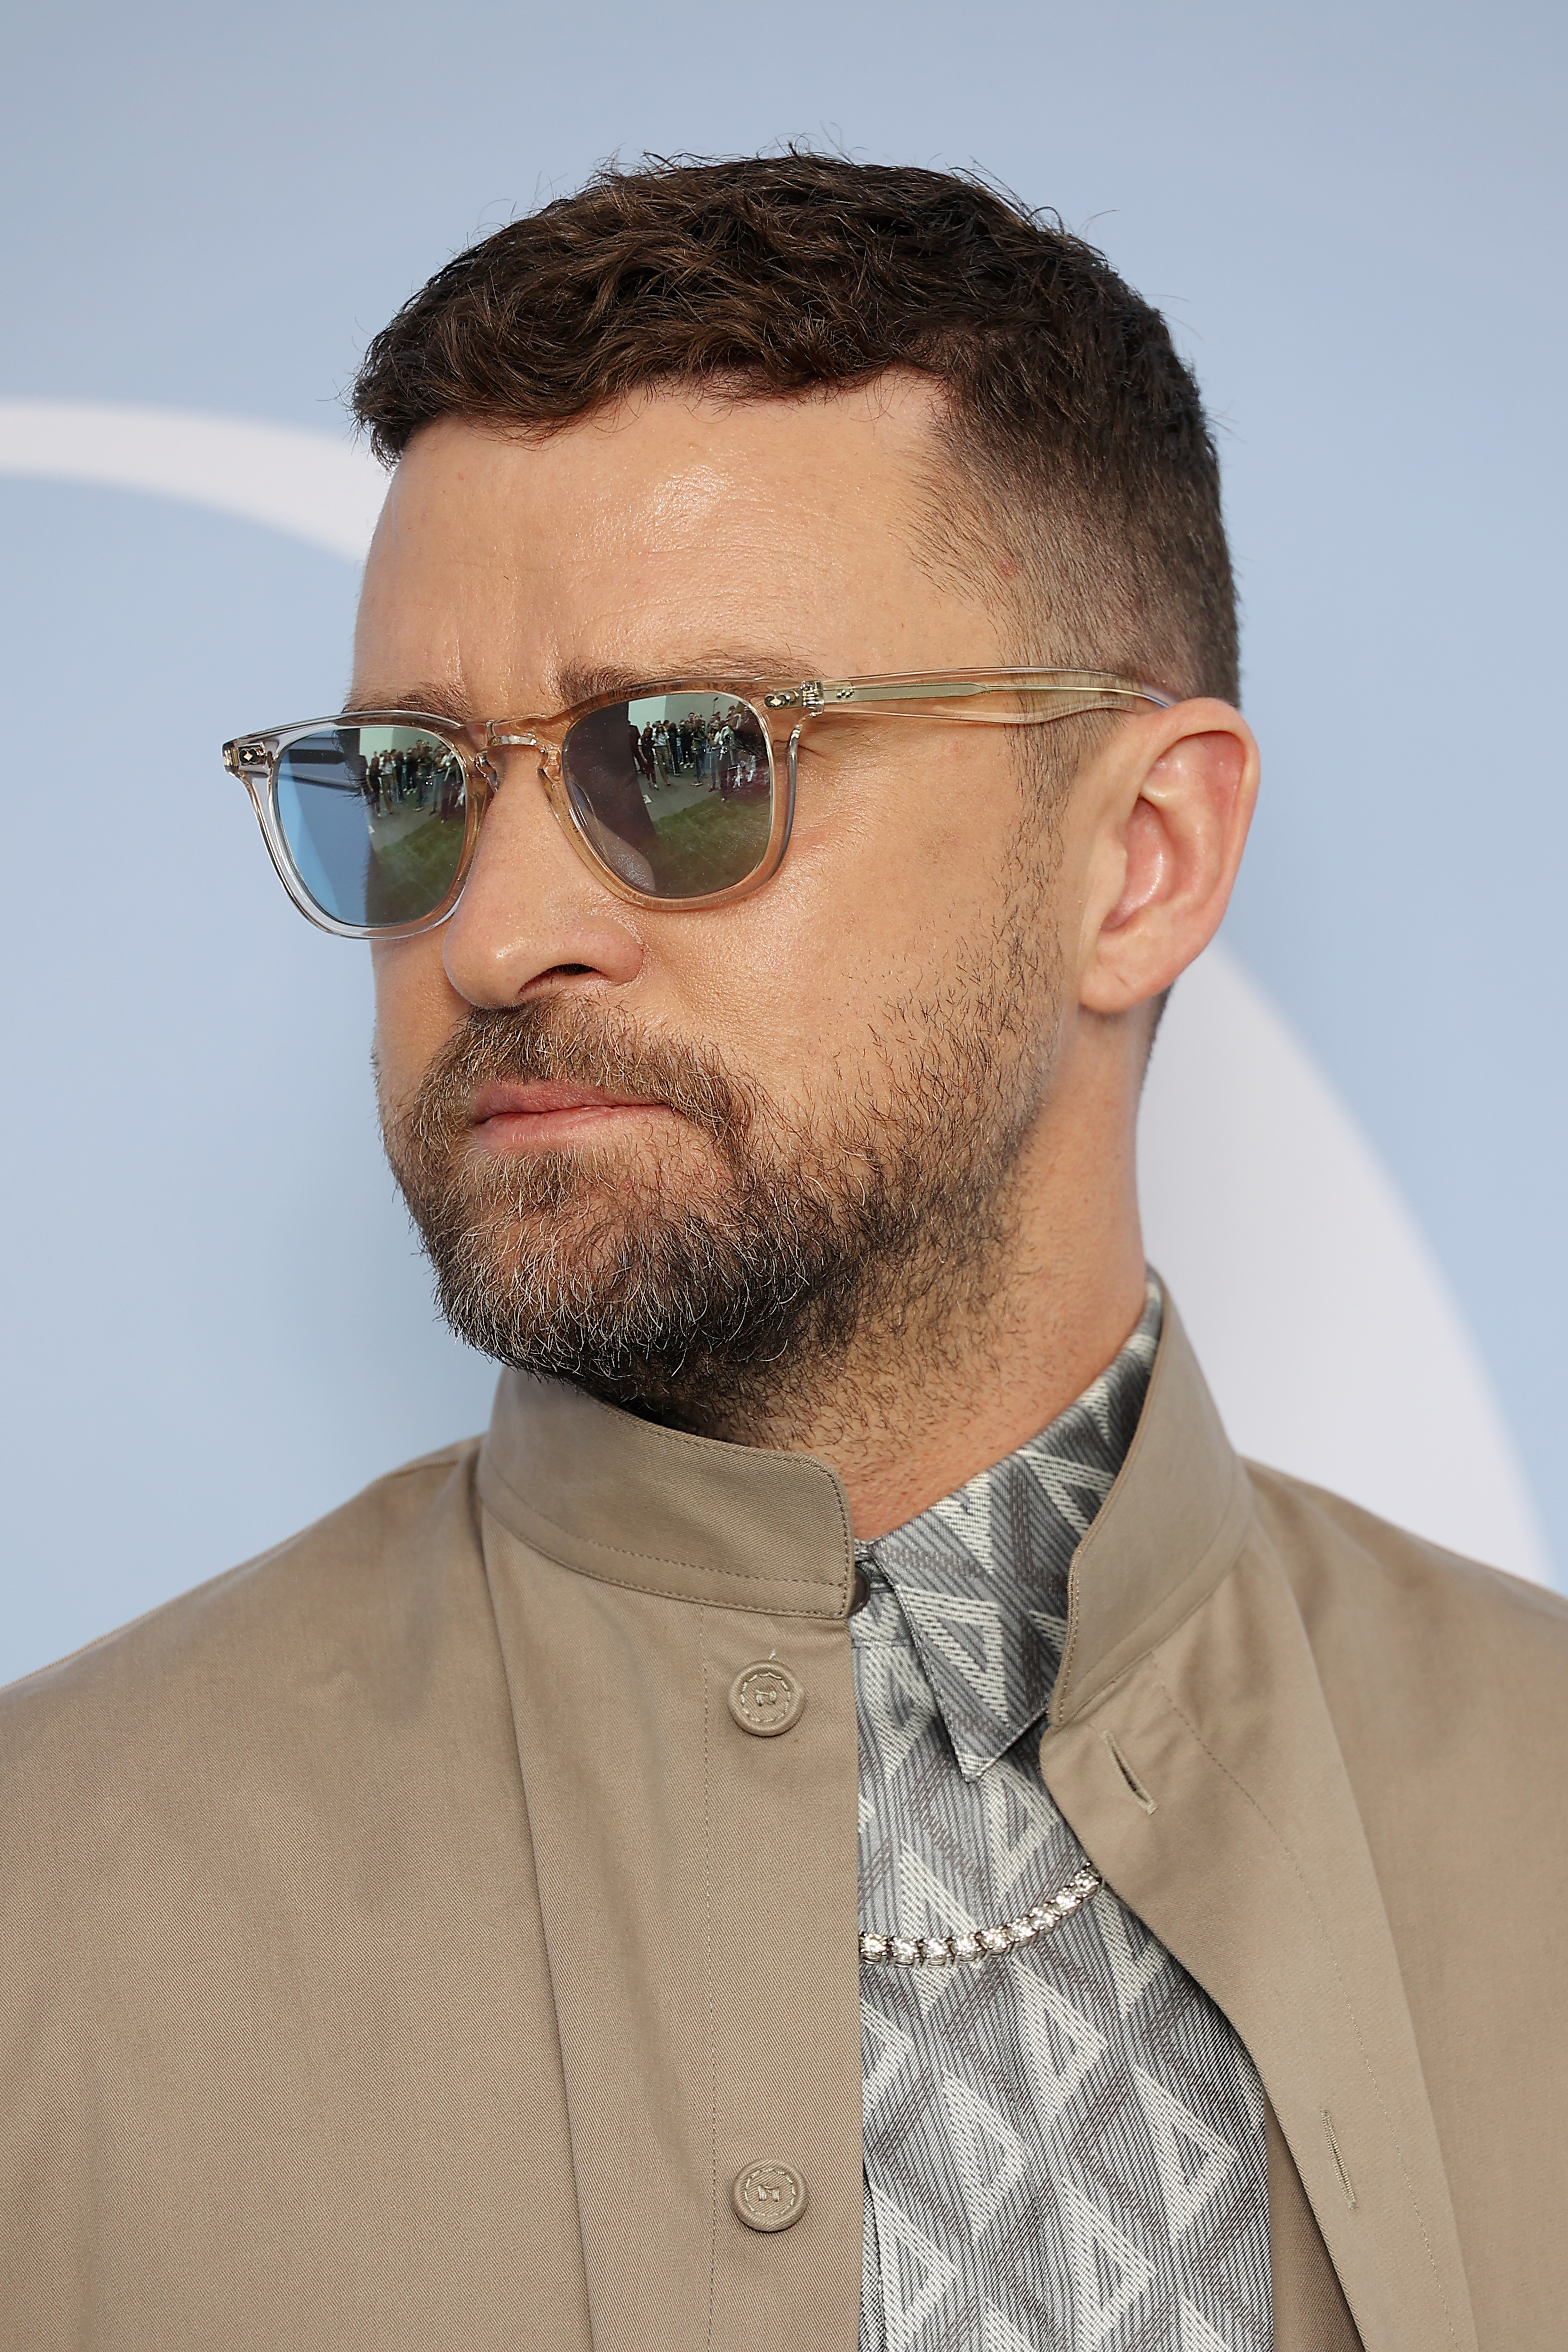 Justin Timberlake wearing a patterned shirt with a high neckline and a beige jacket, accessorized with sunglasses and a necklace